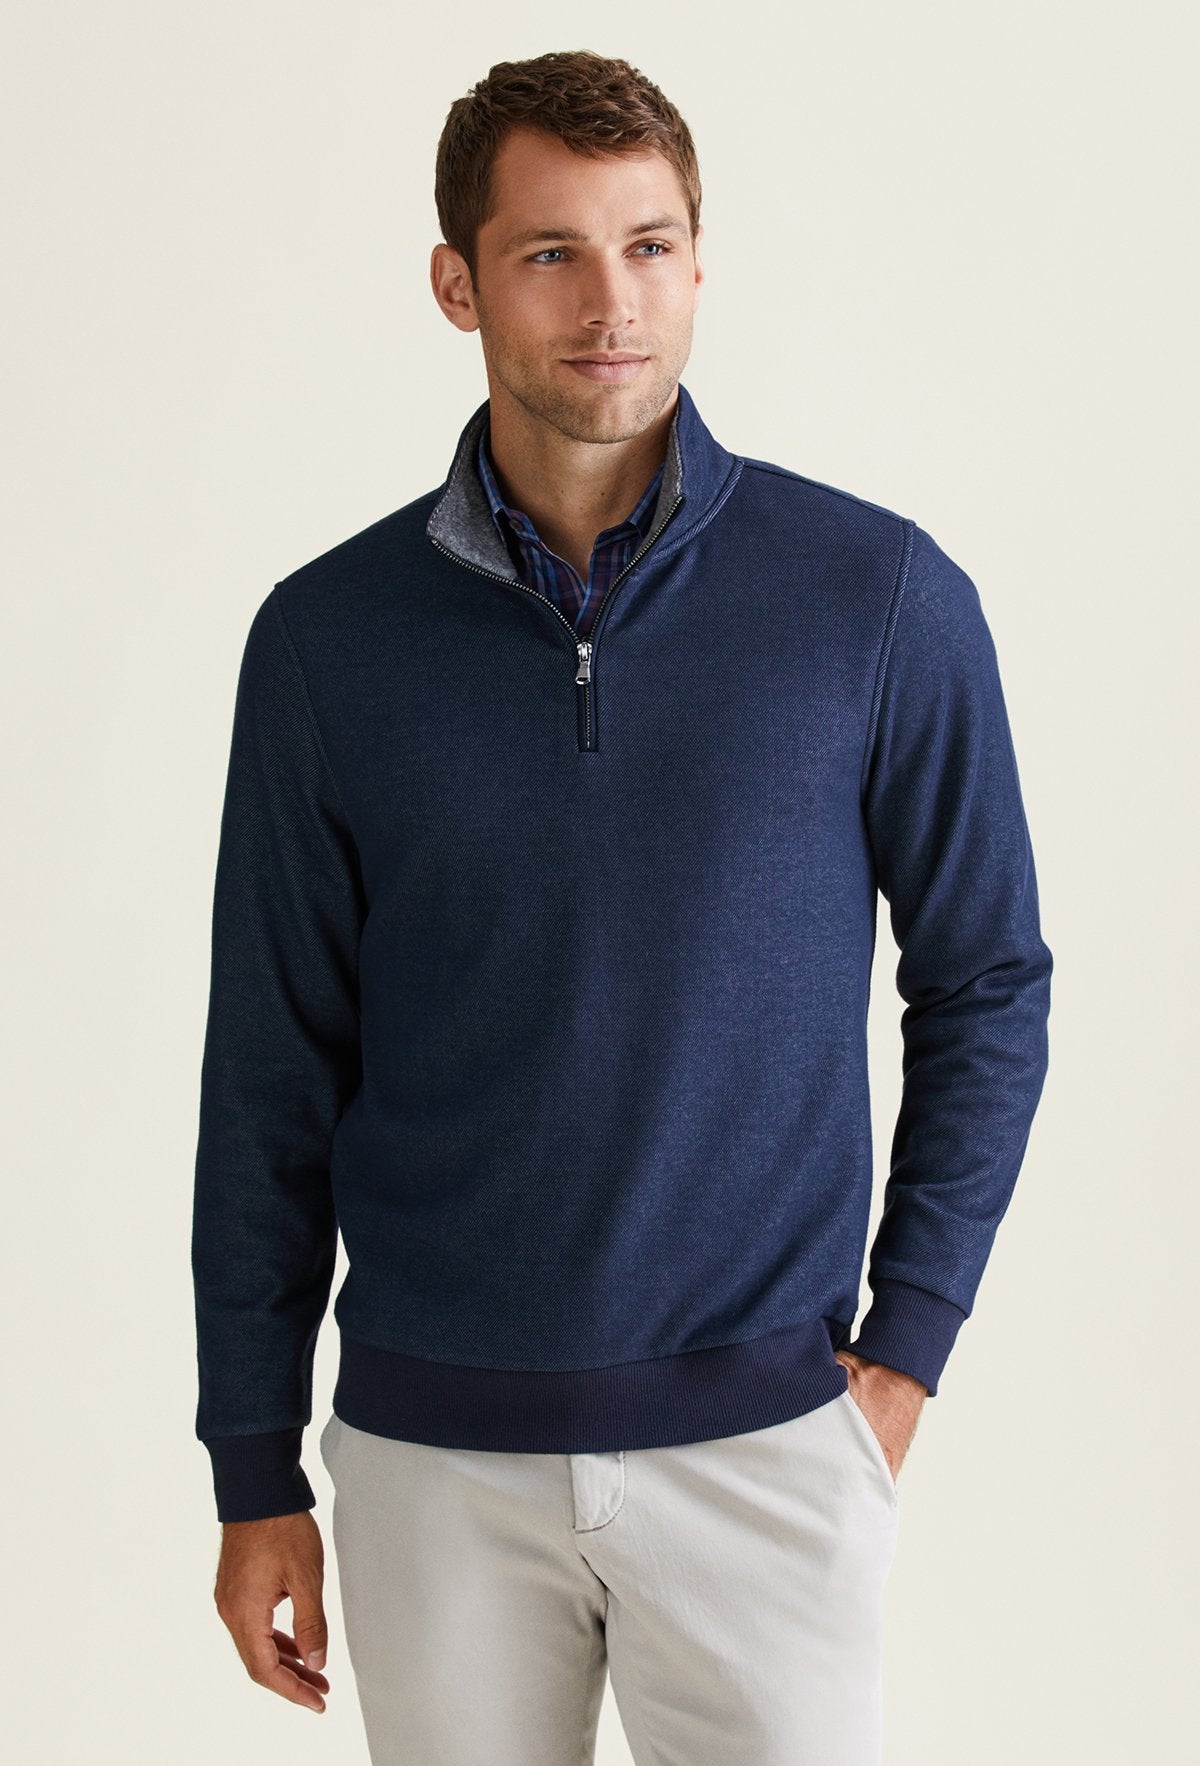 navy sweater mens outfit